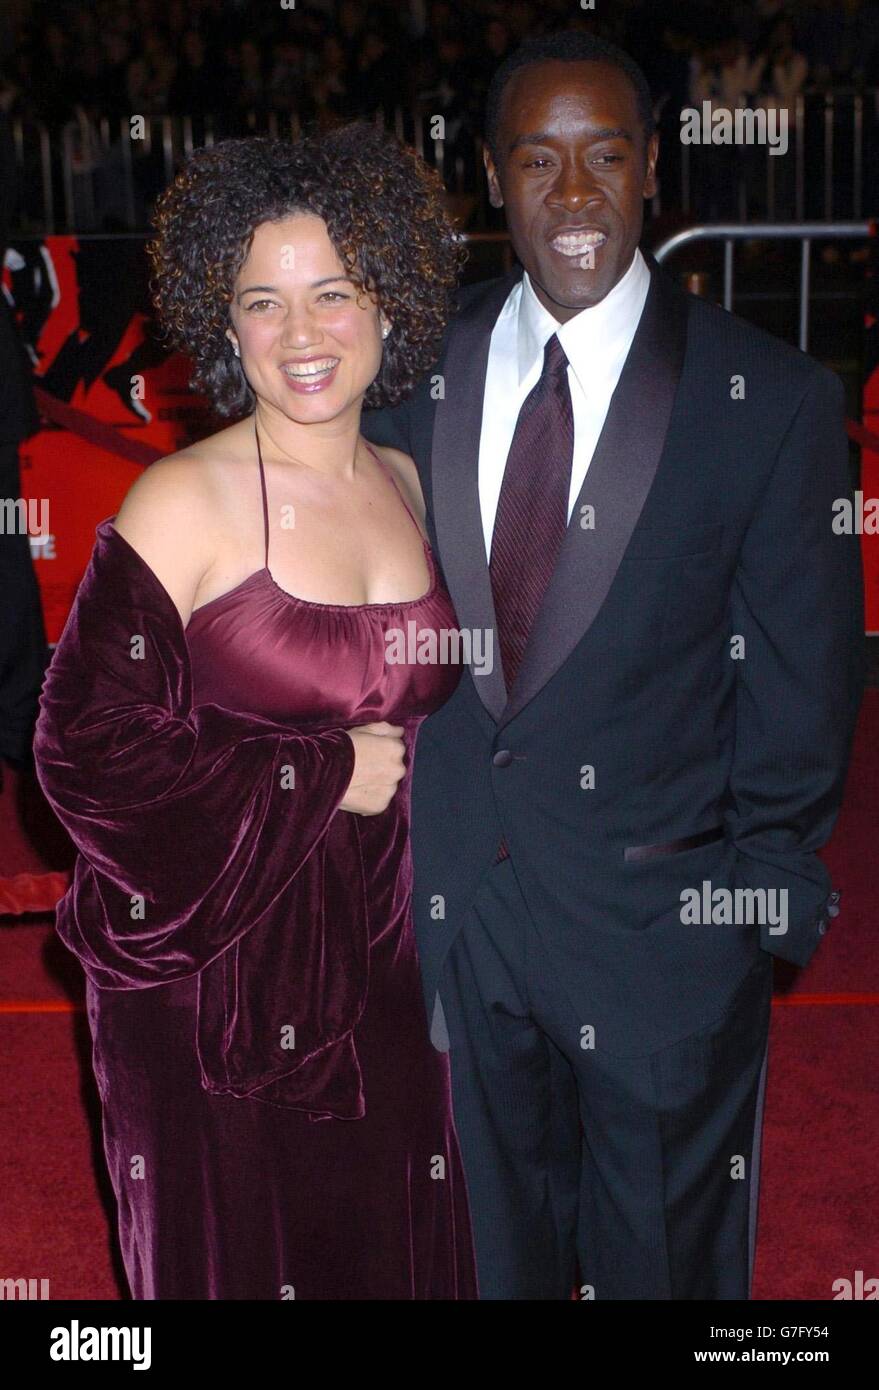 Don Cheadle arrives for the premiere of Ocean's Twelve at the Grauman's Chinese Theatre in Hollywood, California. Stock Photo